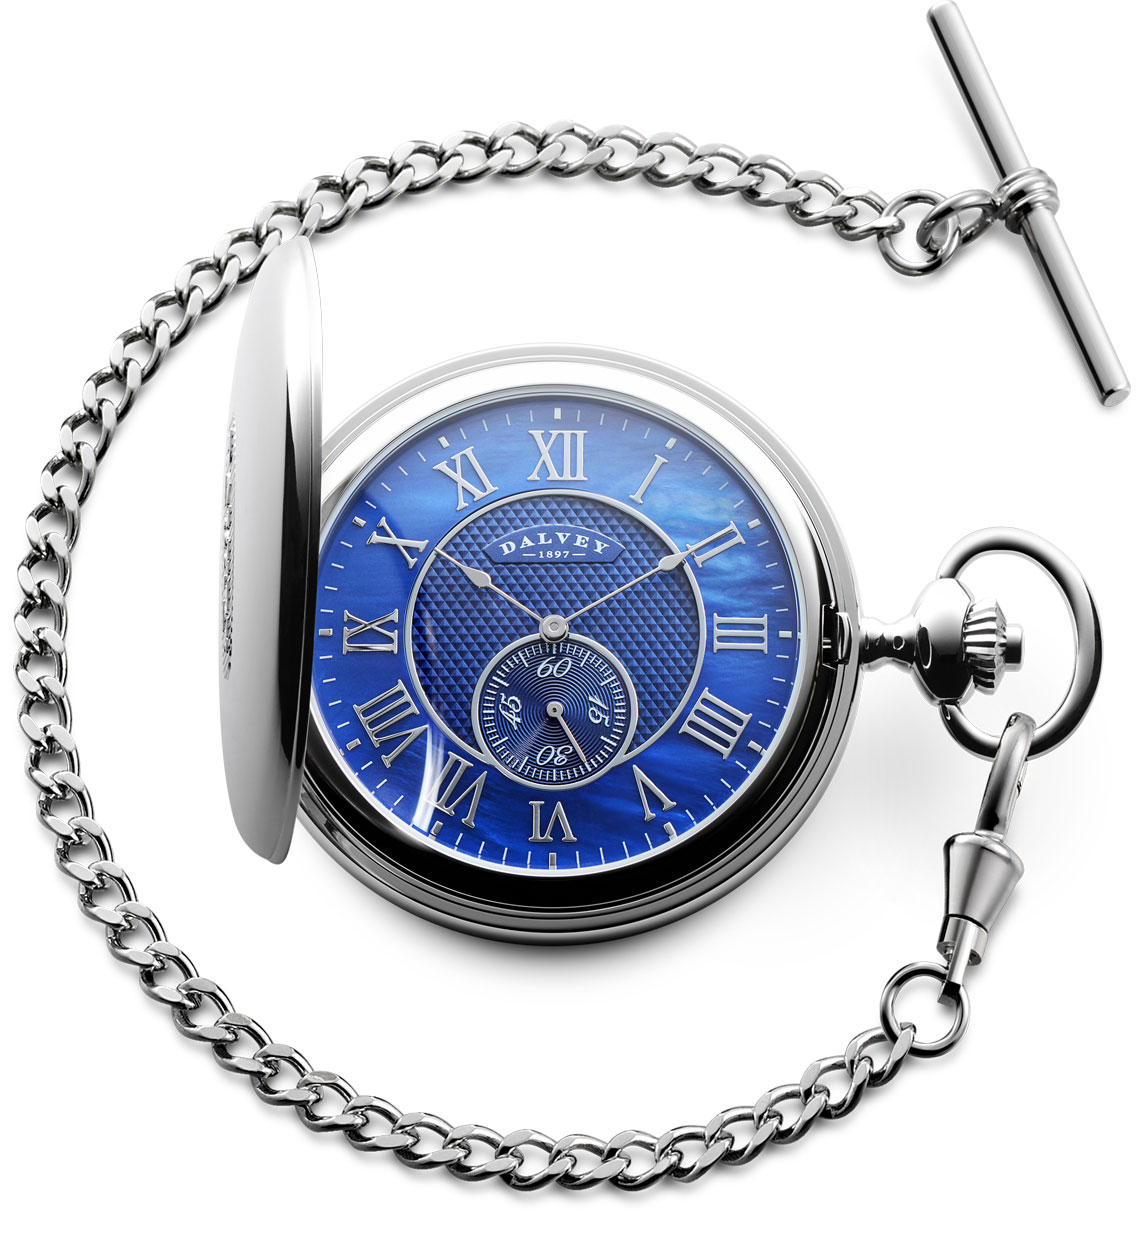 BUTORY Vintage Pocket Watch Quartz Pocket Watch with Chain Classic  Mechanical Movement Smooth Silver Steel Watch for Men Women Ch - Walmart.com